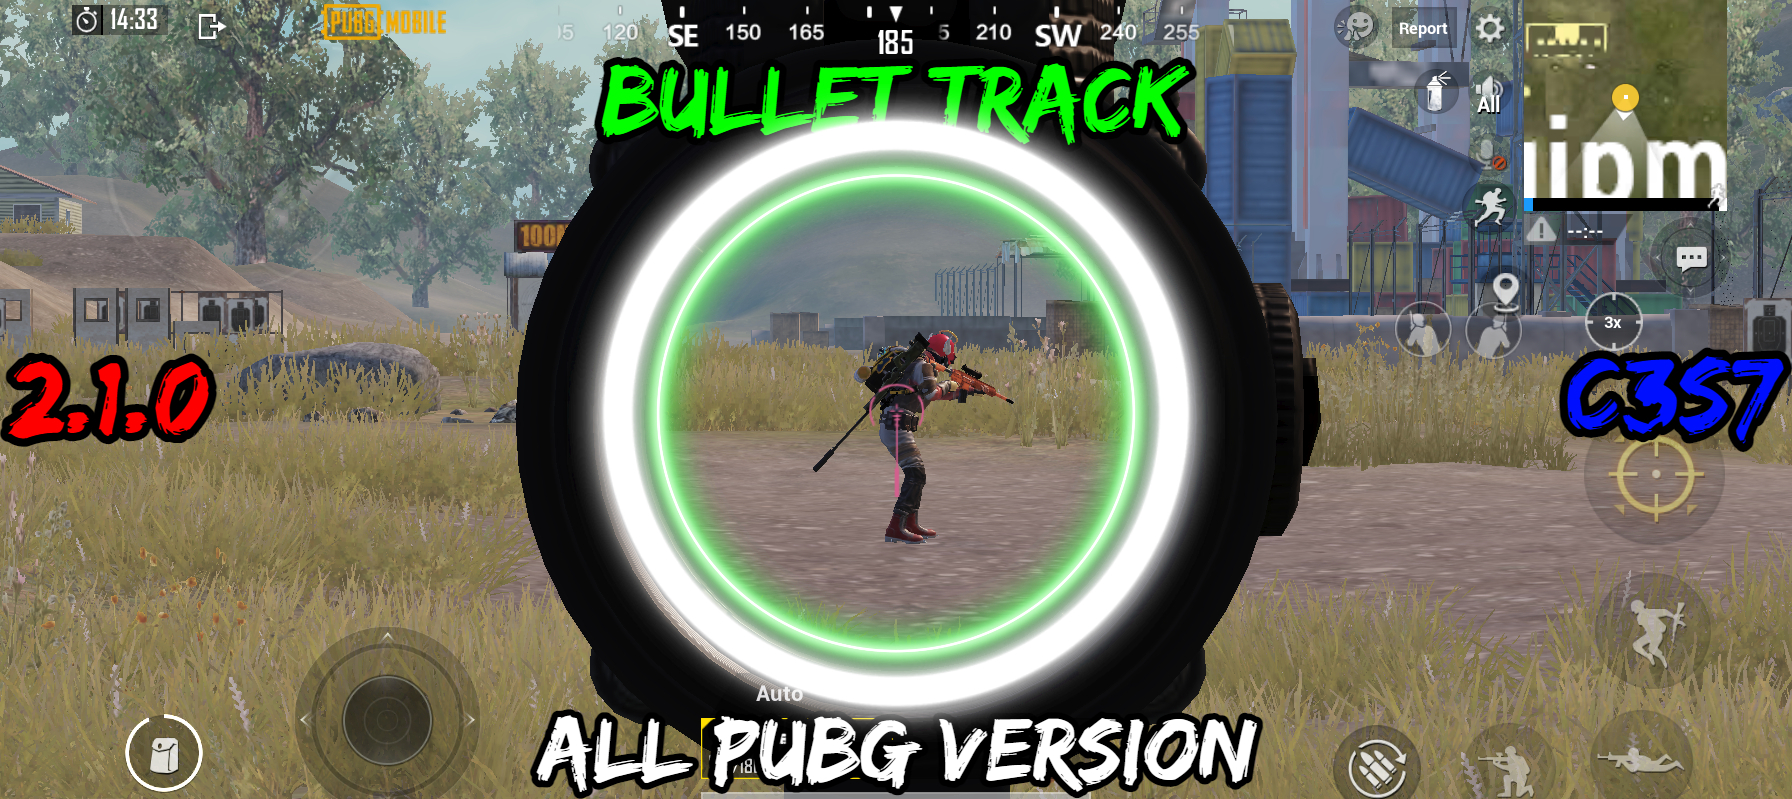 You are currently viewing PUBG BGMI 2.1.0 All Version Bullet Tracking Config Hack C3S7